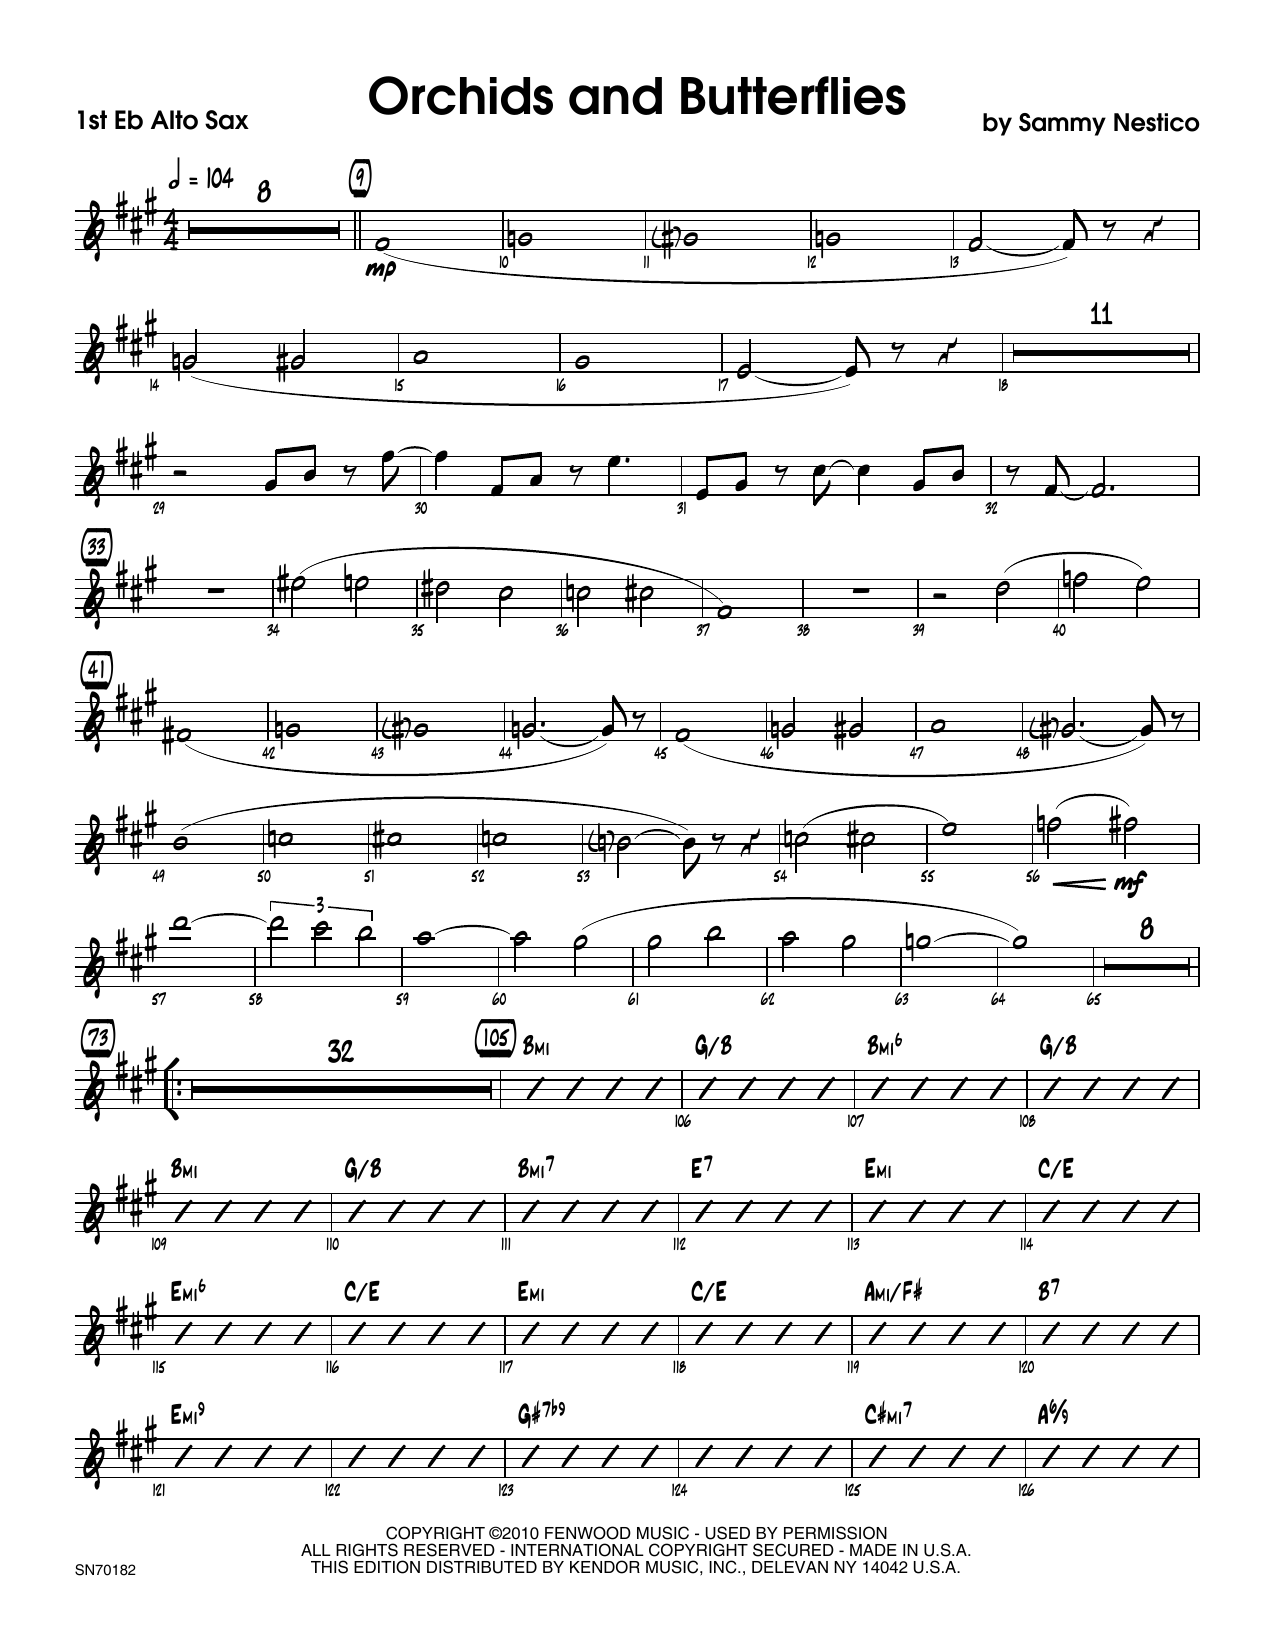 Download Sammy Nestico Orchids And Butterflies - 1st Eb Alto S Sheet Music